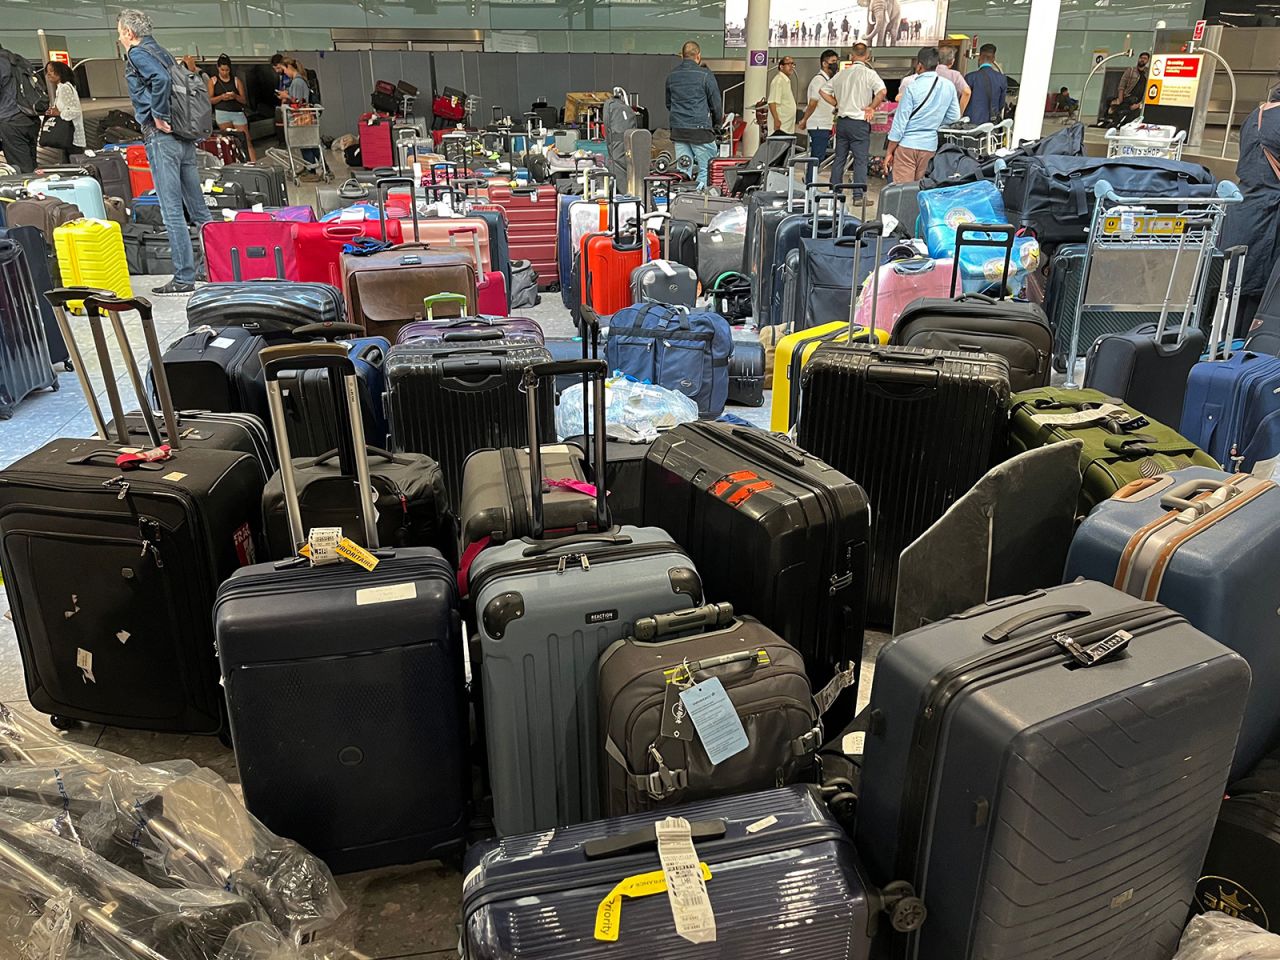 Heathrow has had problems with lost luggage for the past year.